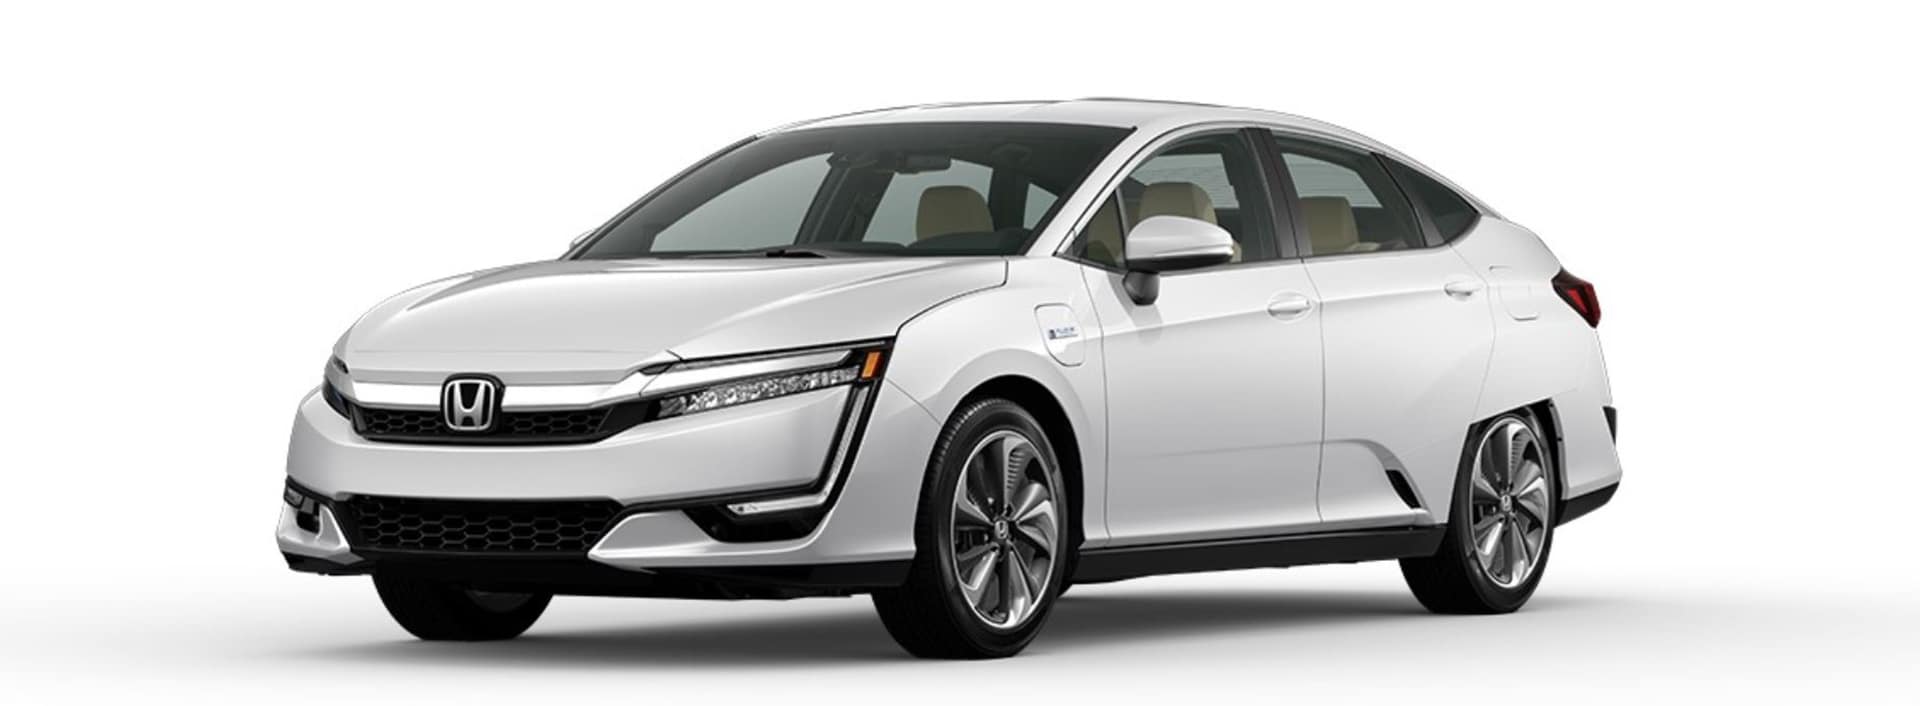 2021 Honda Clarity Plug-In Hybrid Price and Specs Review | Gastonia, NC